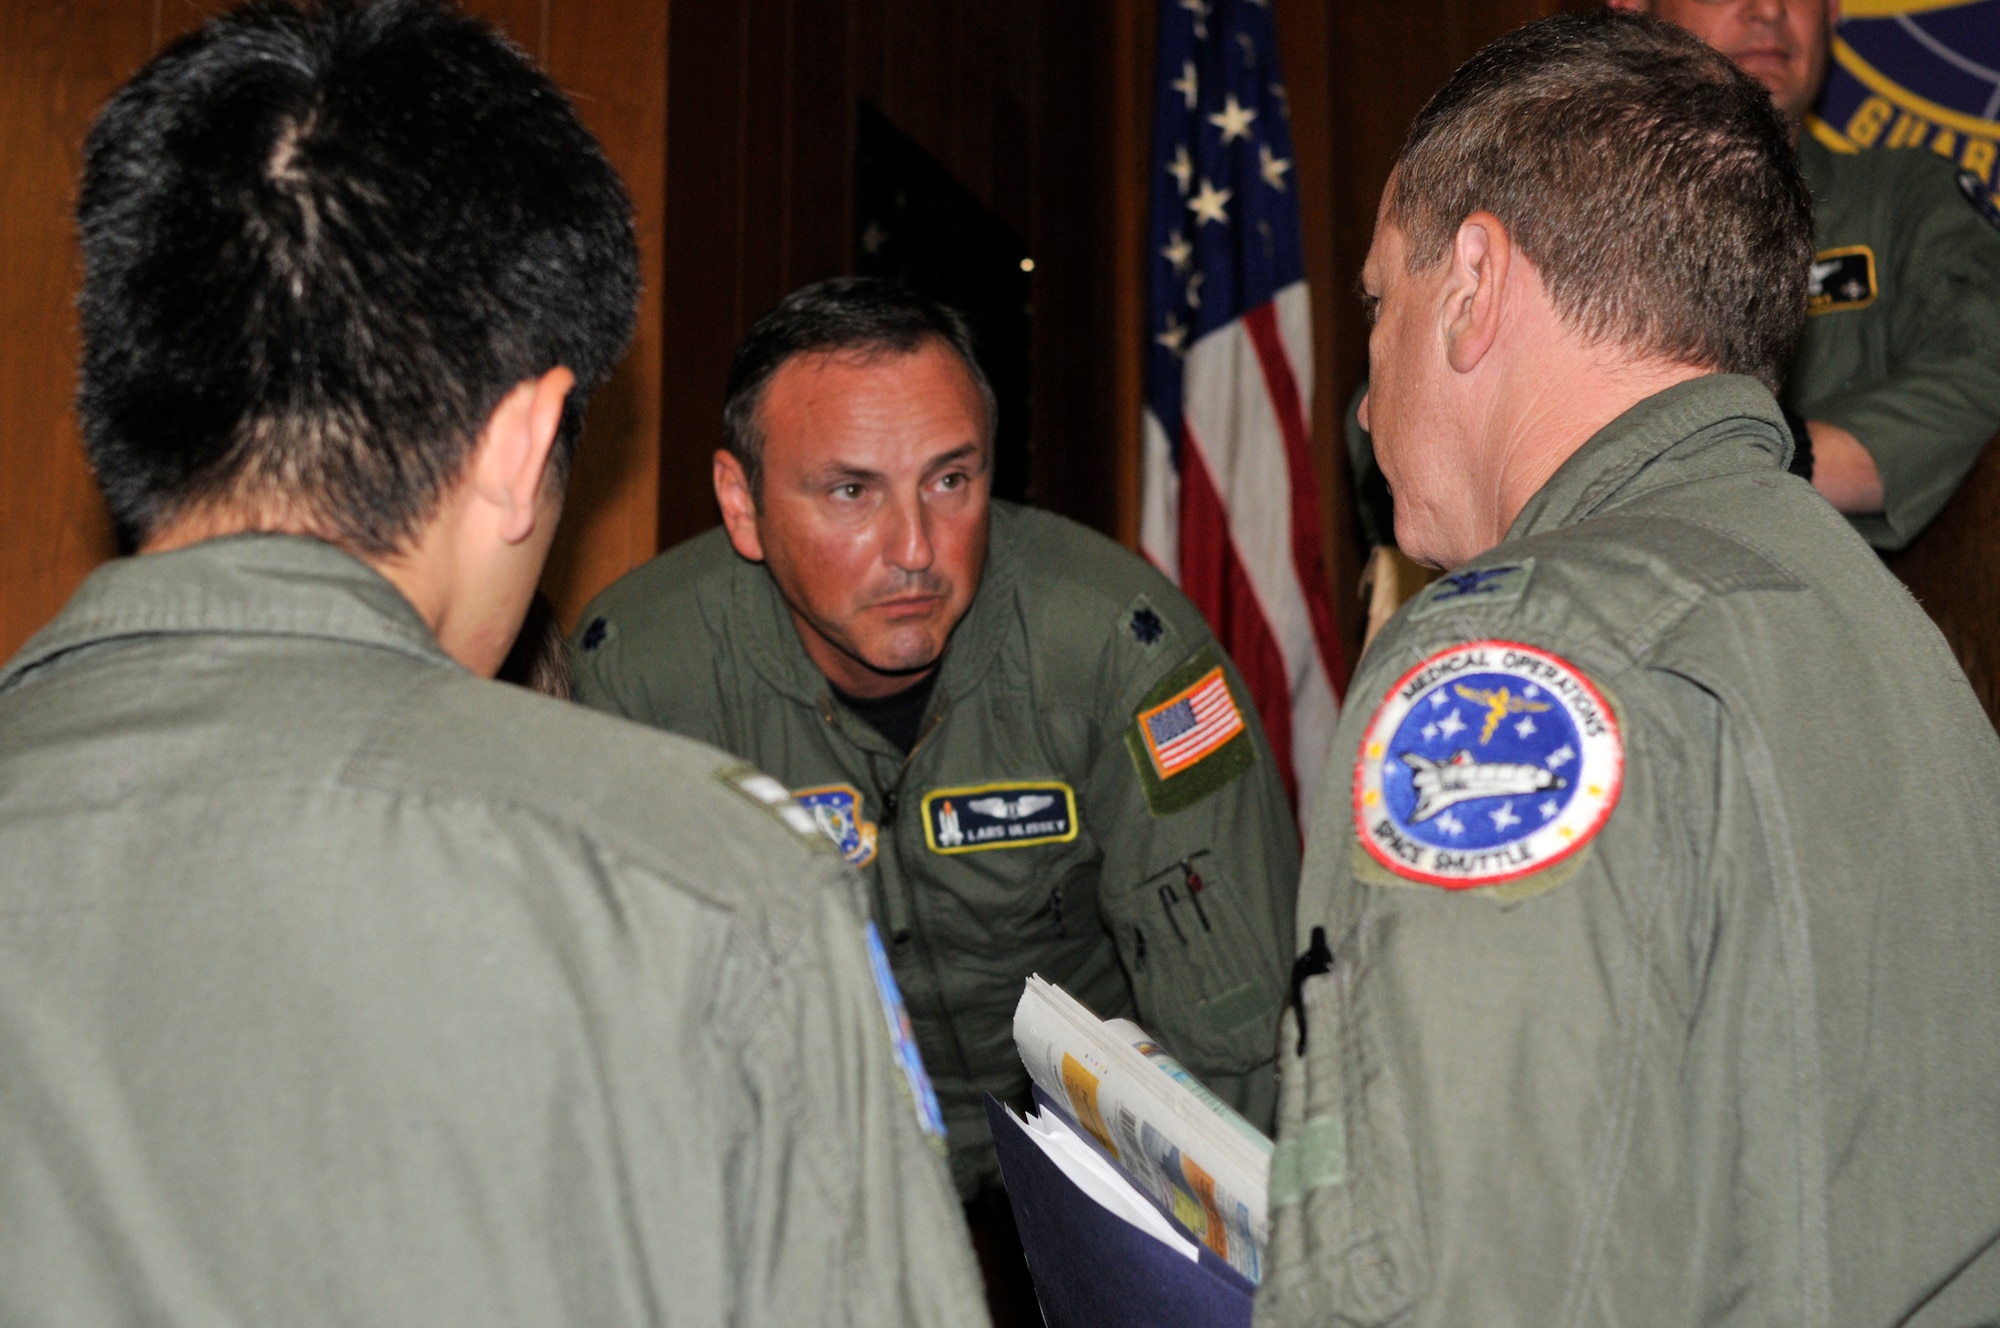 PATRICK AIR FORCE BASE, Fla. - Air Force Lt. Col. Lars Ulissey, 45th Space Wing Chief of Bioastronautics, Det. 3, Medical Division, briefs four flight surgeons during the Shuttle Joint Task Force in briefing Nov. 3, at the 301st Rescue Squadron here. The briefings are held to prepare those who are here supporting the emergency portion of the space shuttle Discovery launch Nov. 5. (U.S. Air Force photo/Capt. Cathleen Snow)